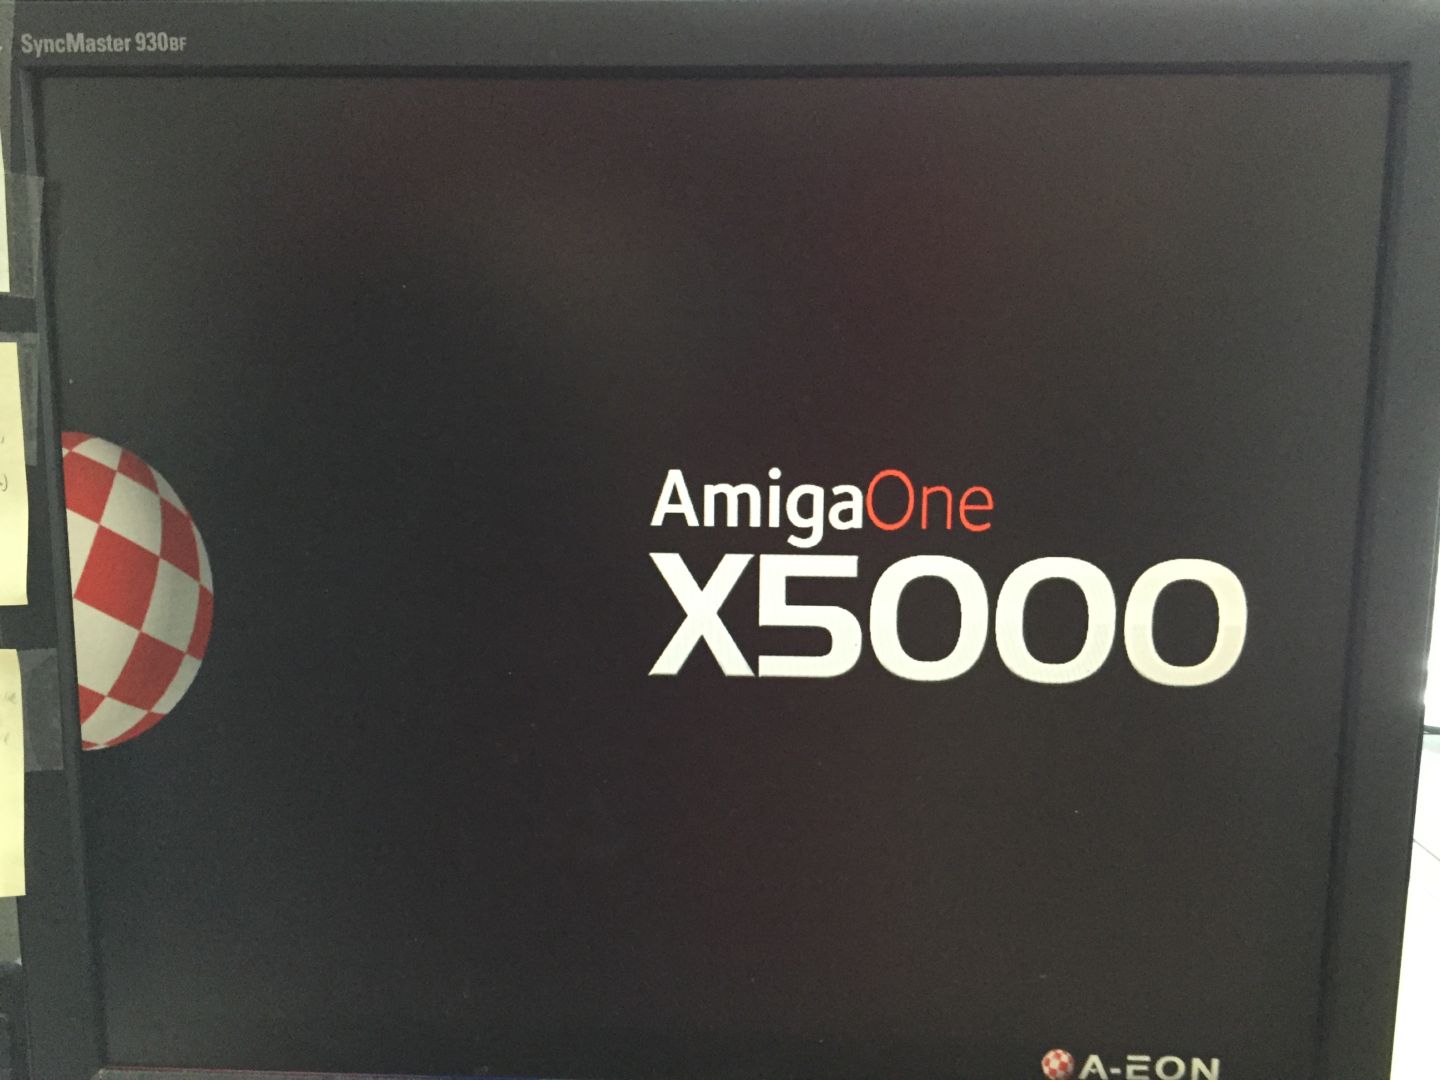 This is the splash screen that displays when the X5000 is turned on.